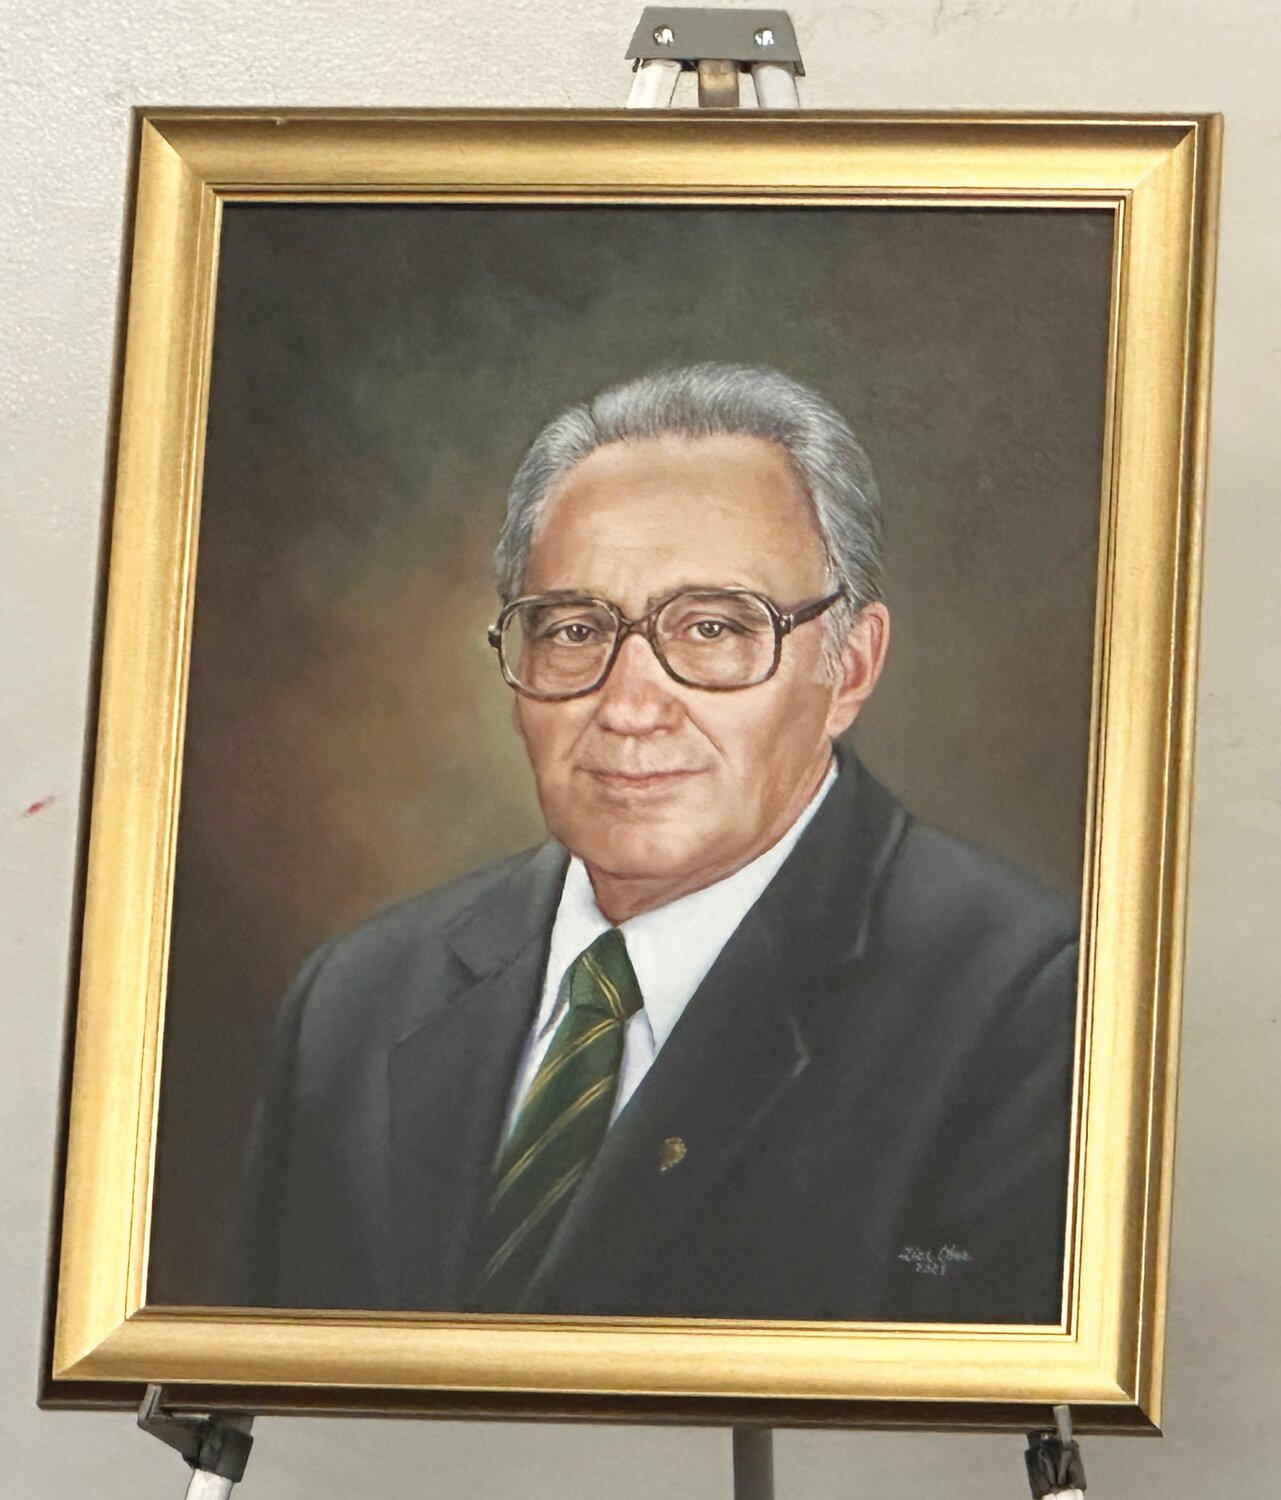 The new portrait of Prof. Keith House.